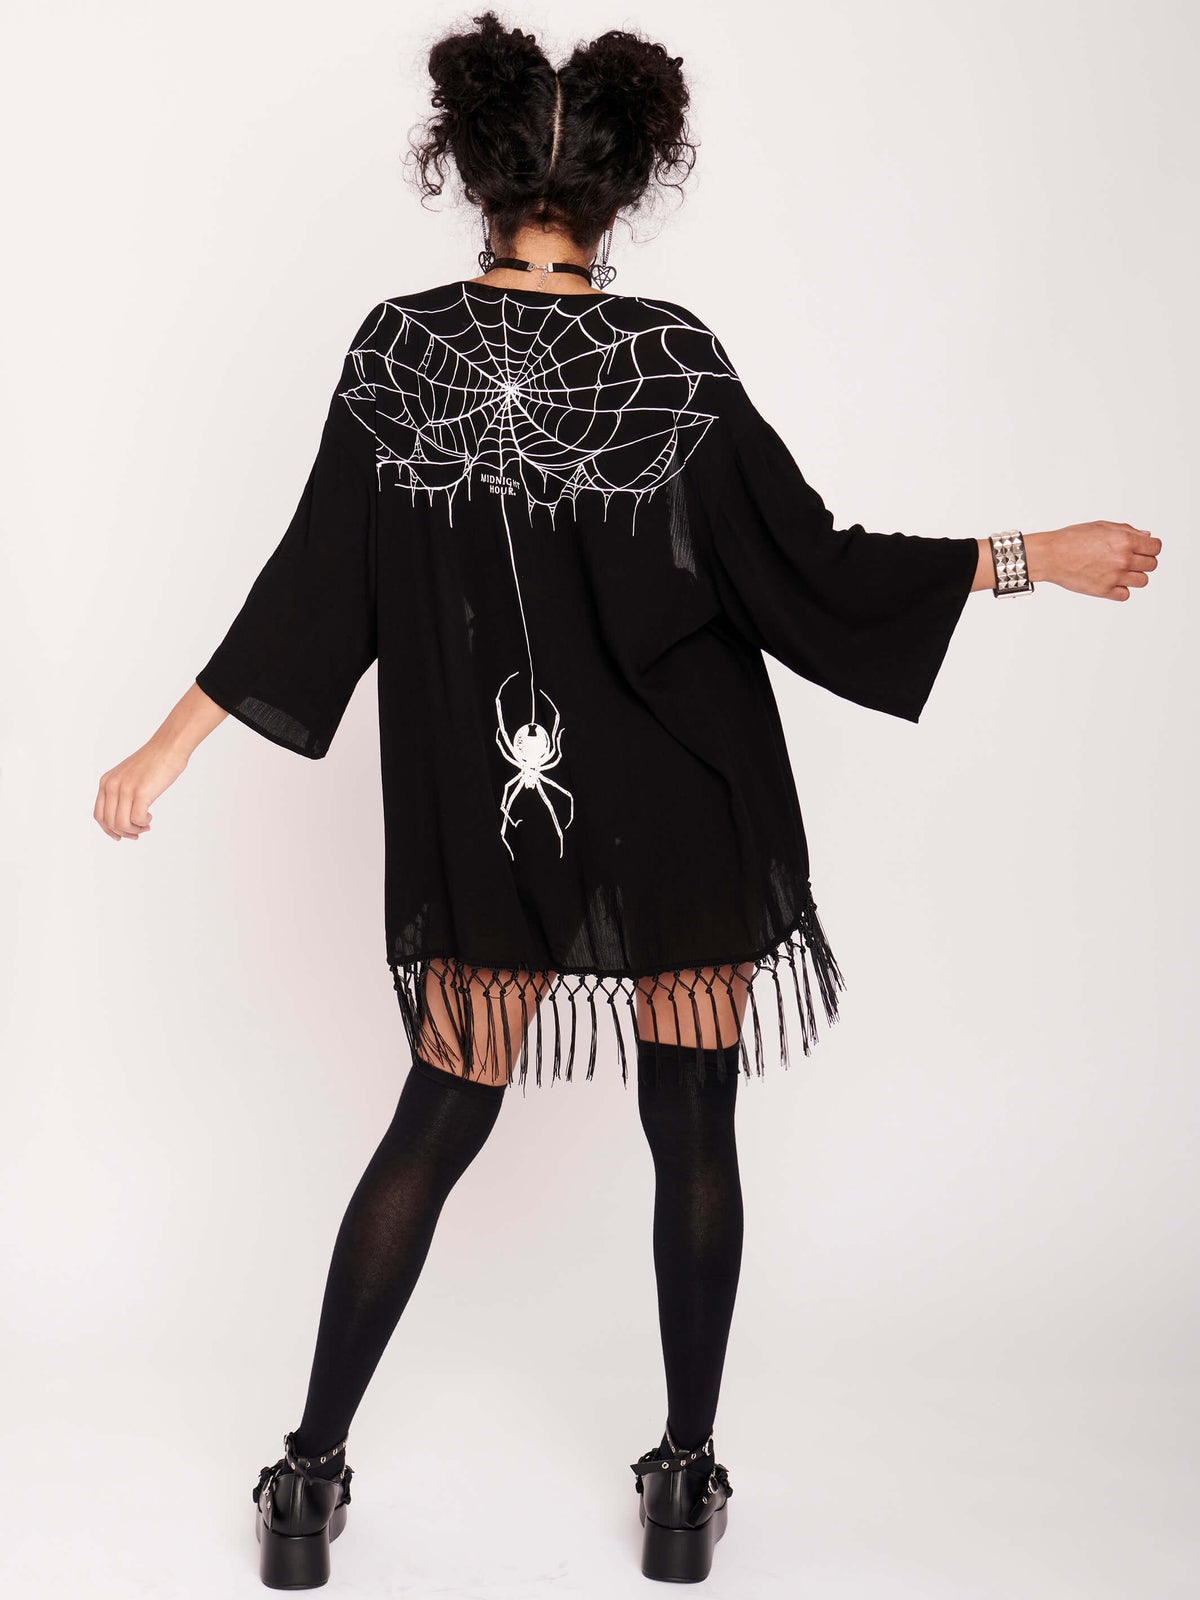 Black Widow Kimono. Stand out from the masses with this beautifully crafted kimono featuring a cobweb and black widow spider print. with black fringe details. Goth grunge fashion, alt girl fashion, goth clothing, nugoth, black lace, goth punk top, egirl fashion, emo fashion, spider.